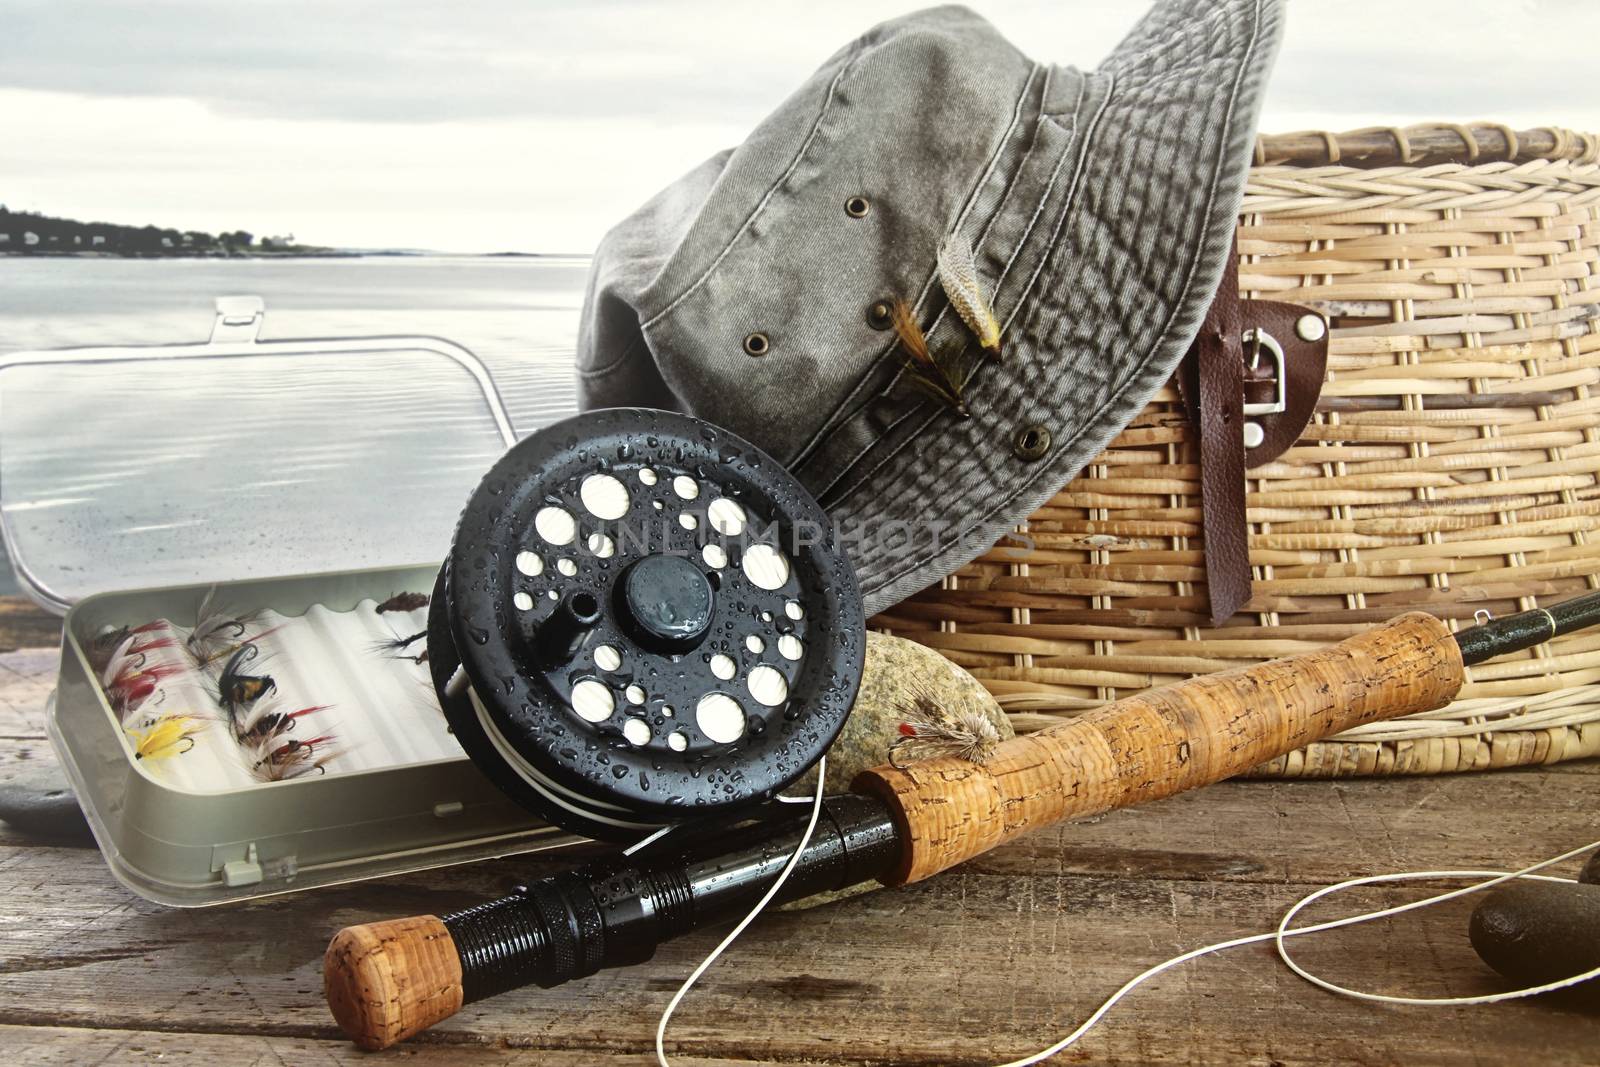 Hat and fly fishing gear on table near the water by Sandralise